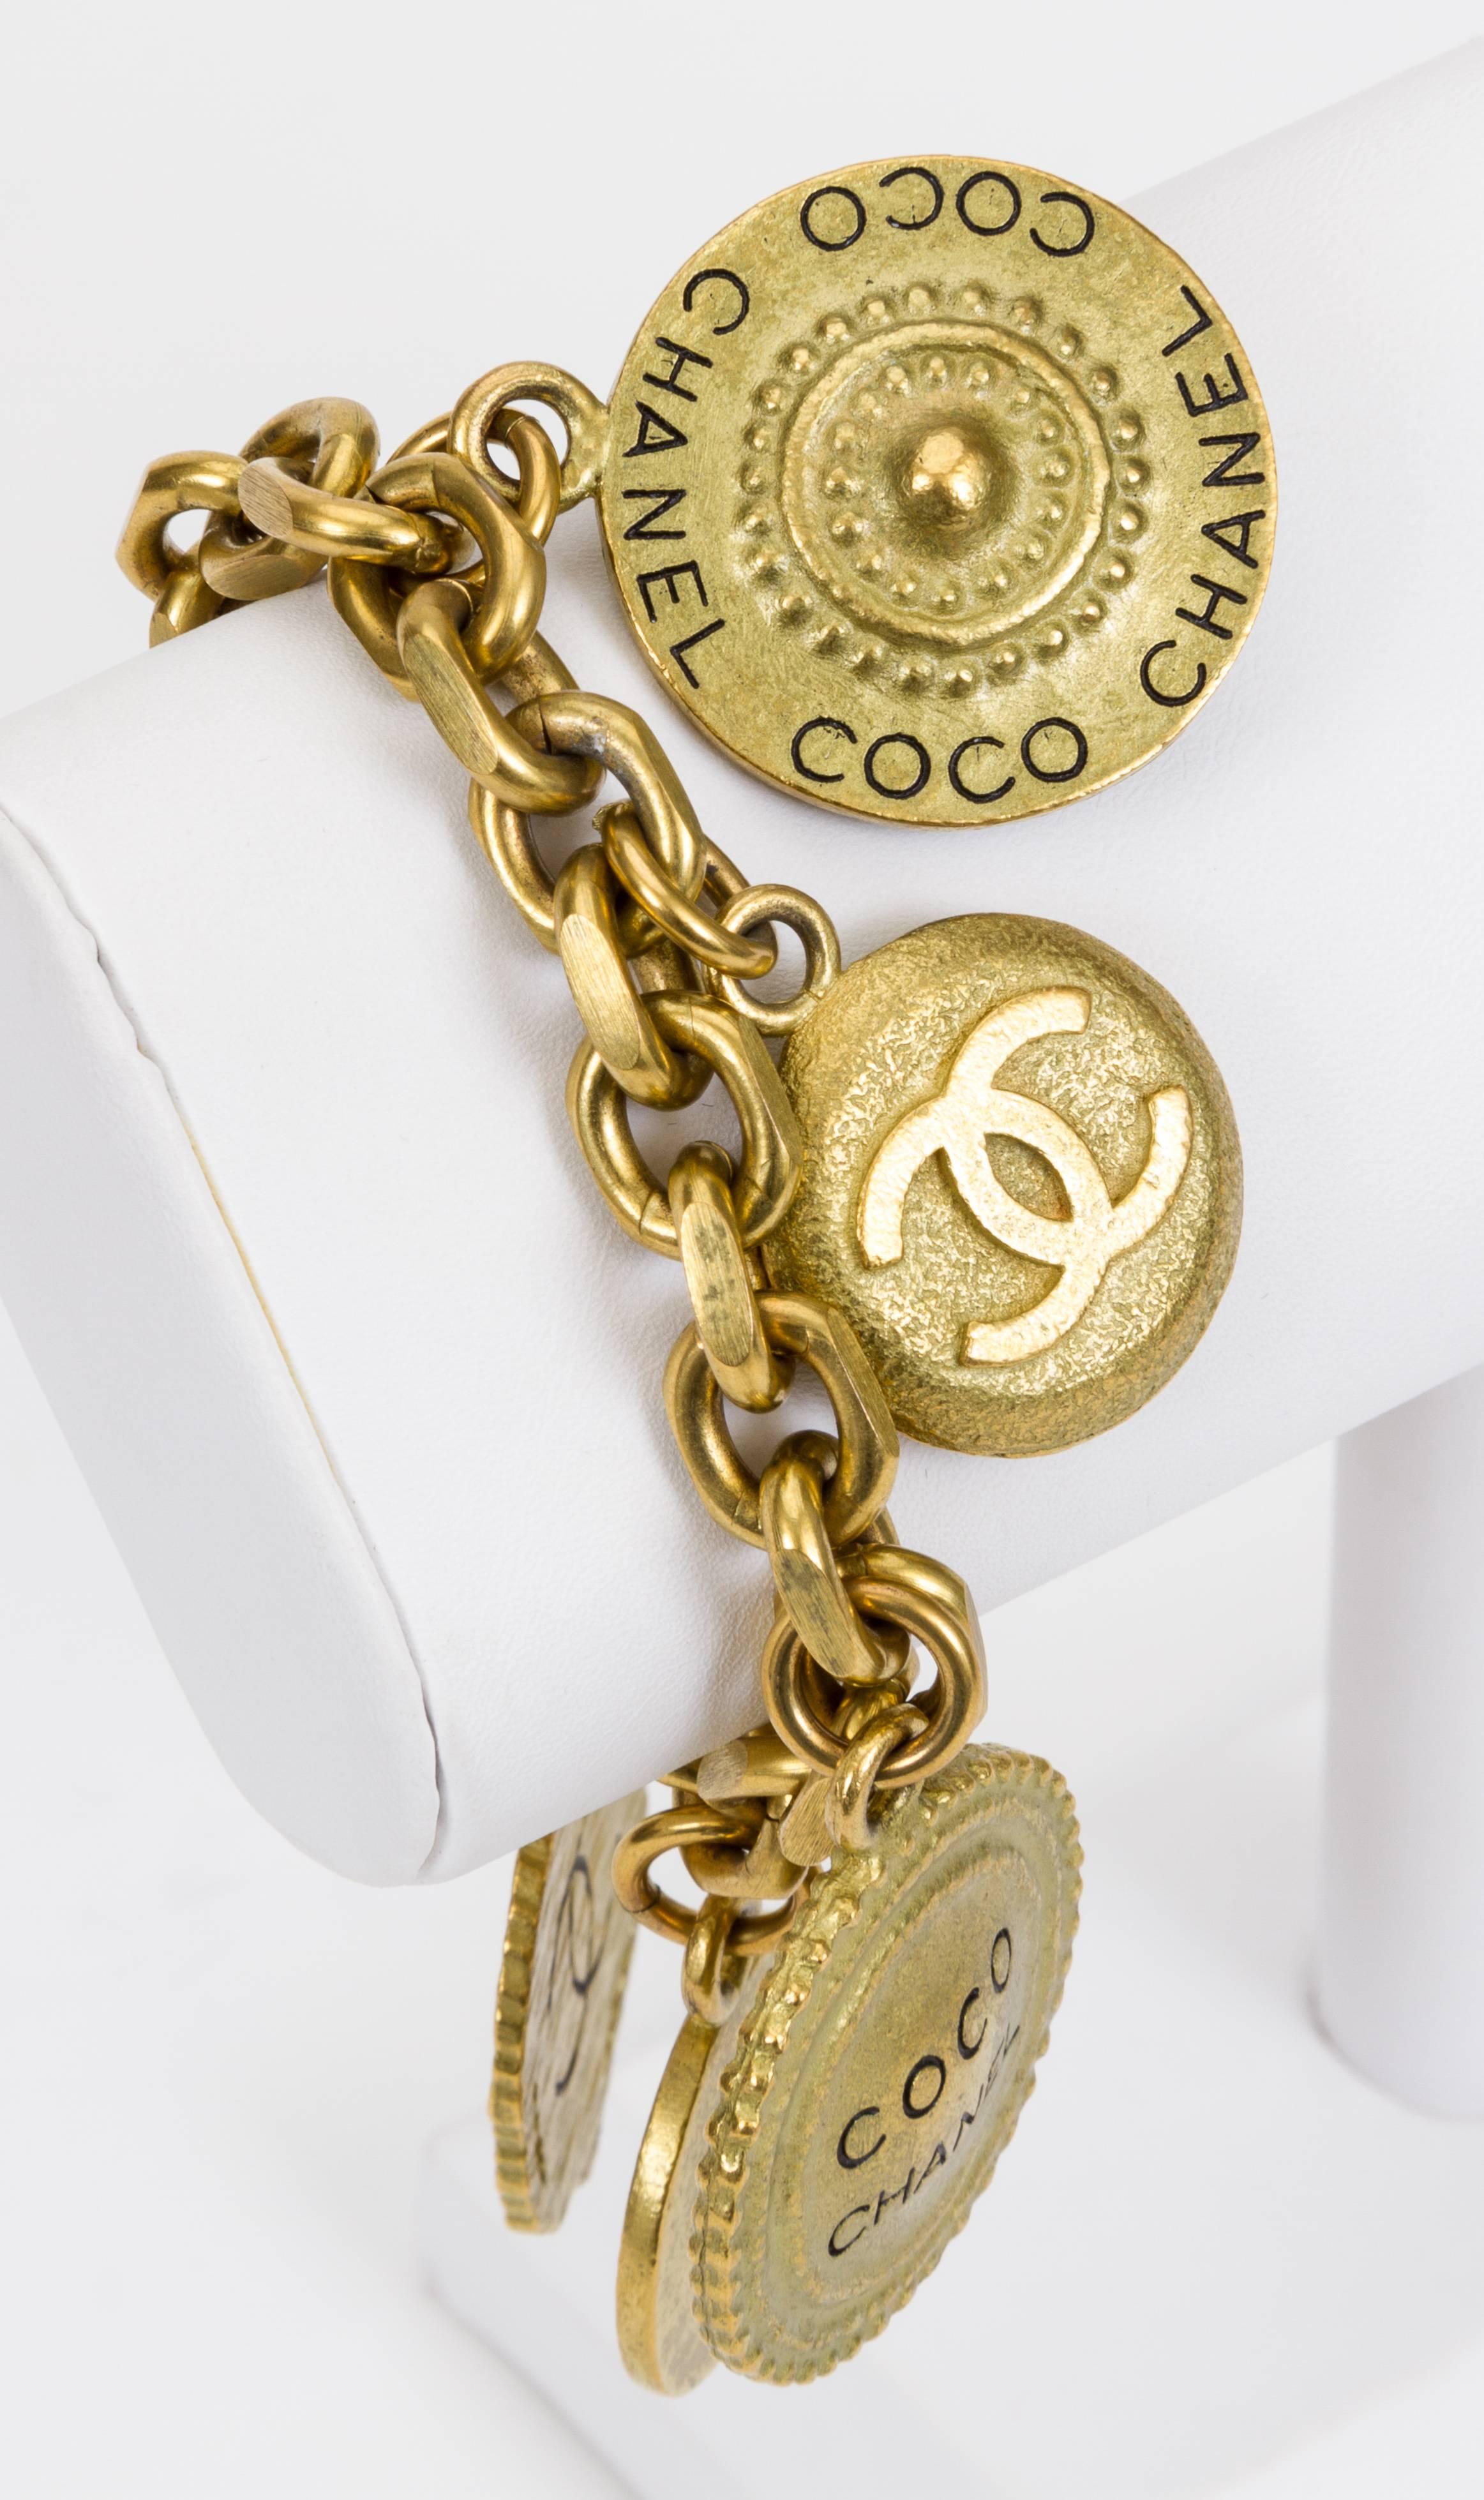 Chanel satin gold log cc coin charm bracelet. Collection spring 95. Come with original box.
